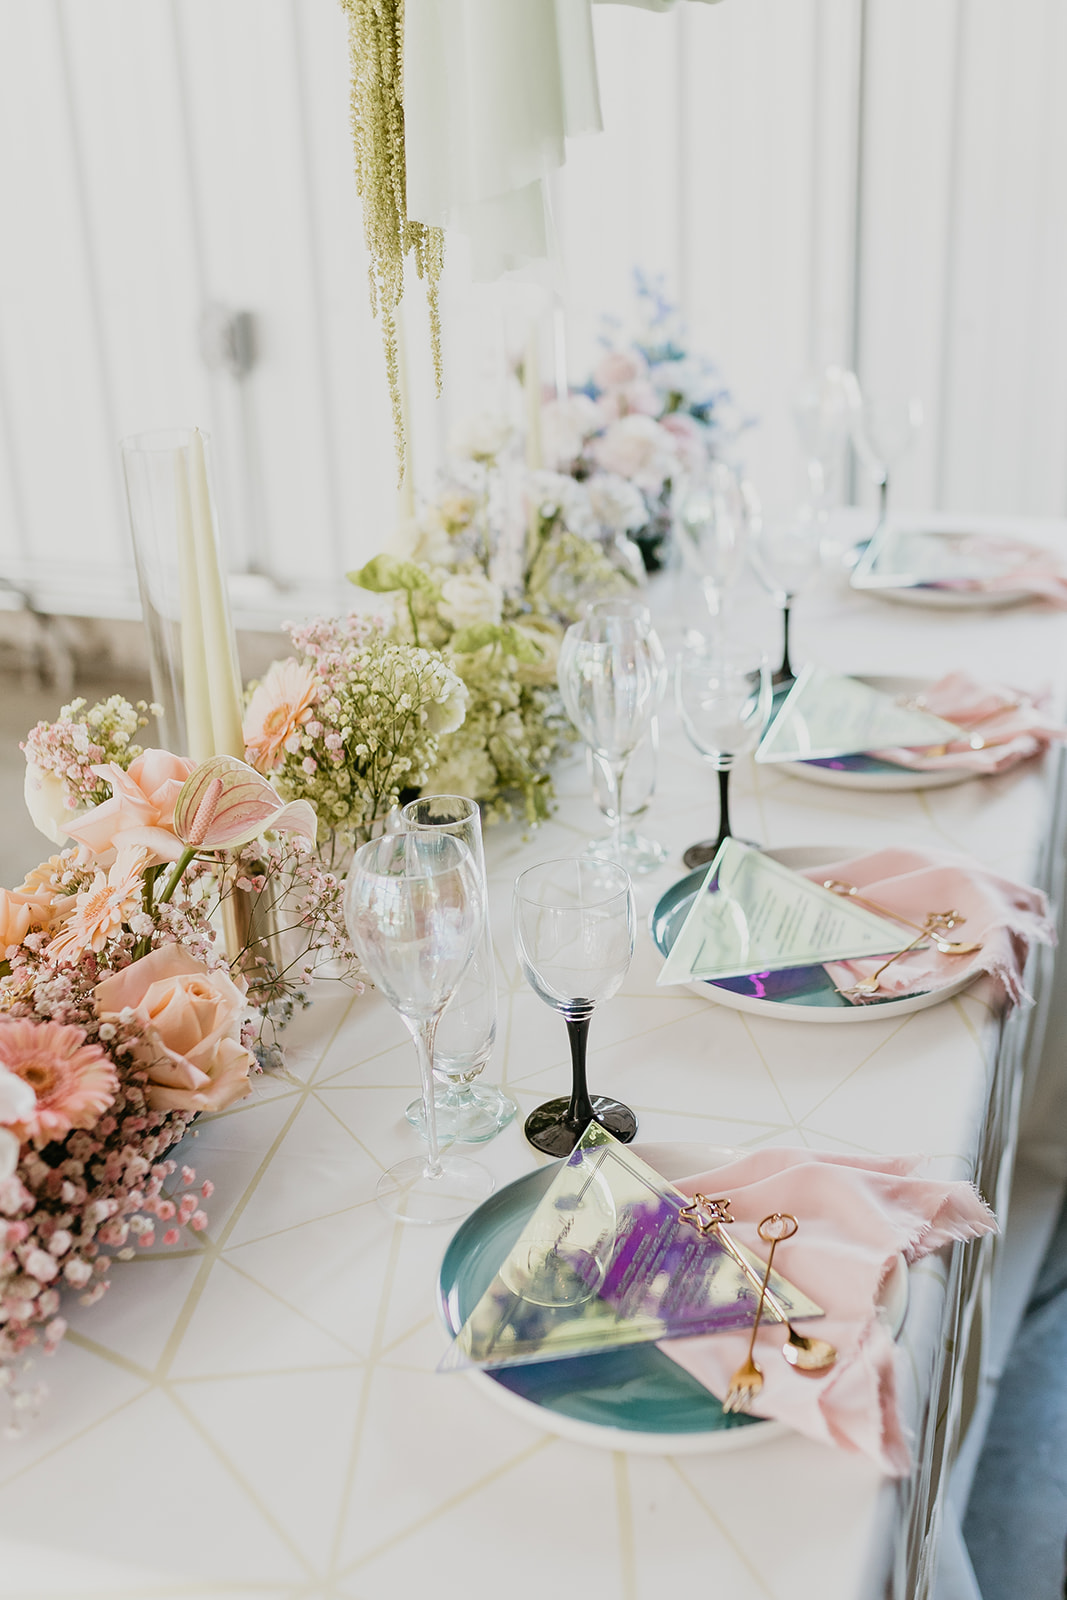 Holographic wedding inspiration for the rocker couple who loves colour on their wedding day